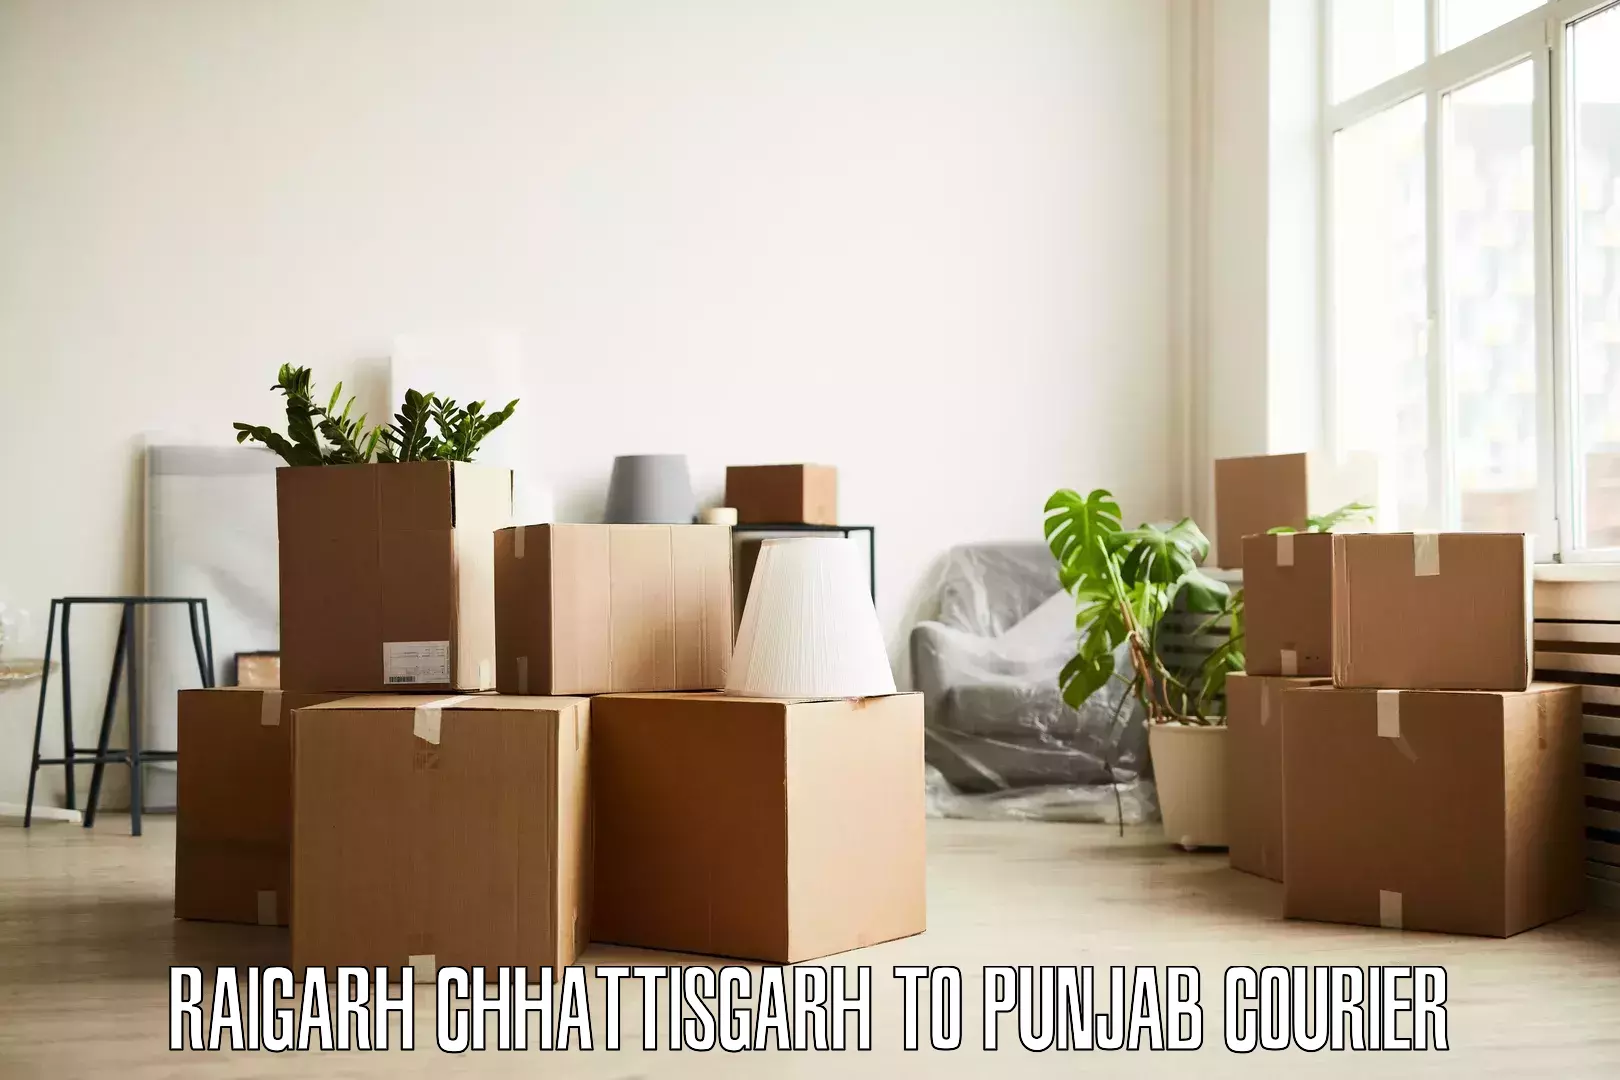 Affordable household movers in Raigarh Chhattisgarh to Mohali